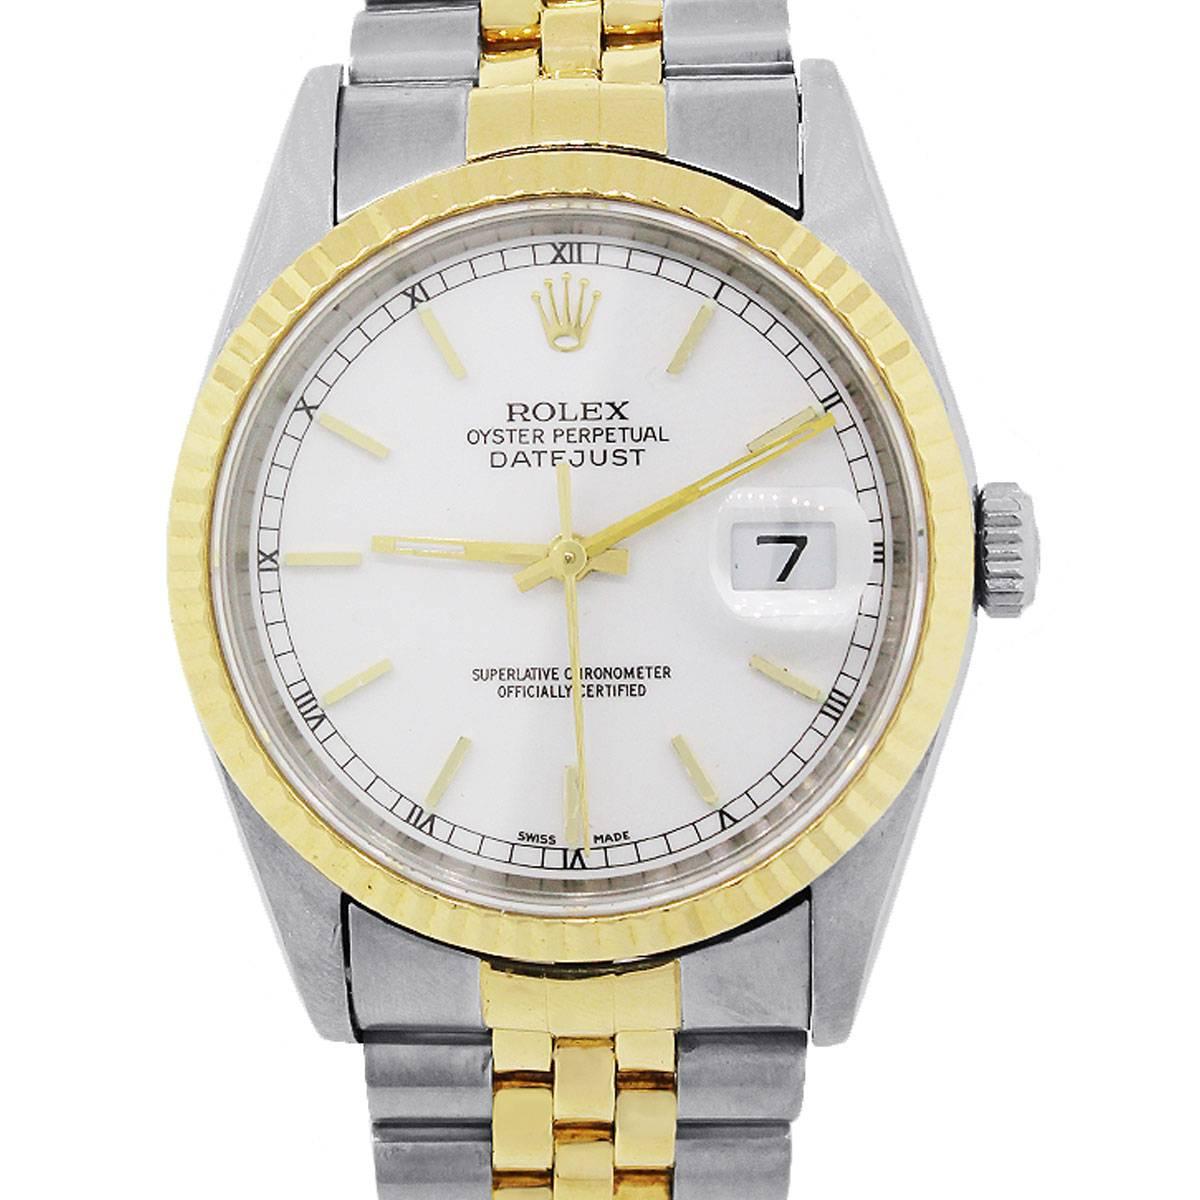 Rolex 16233 Datejust Two-Tone White Dial Watch